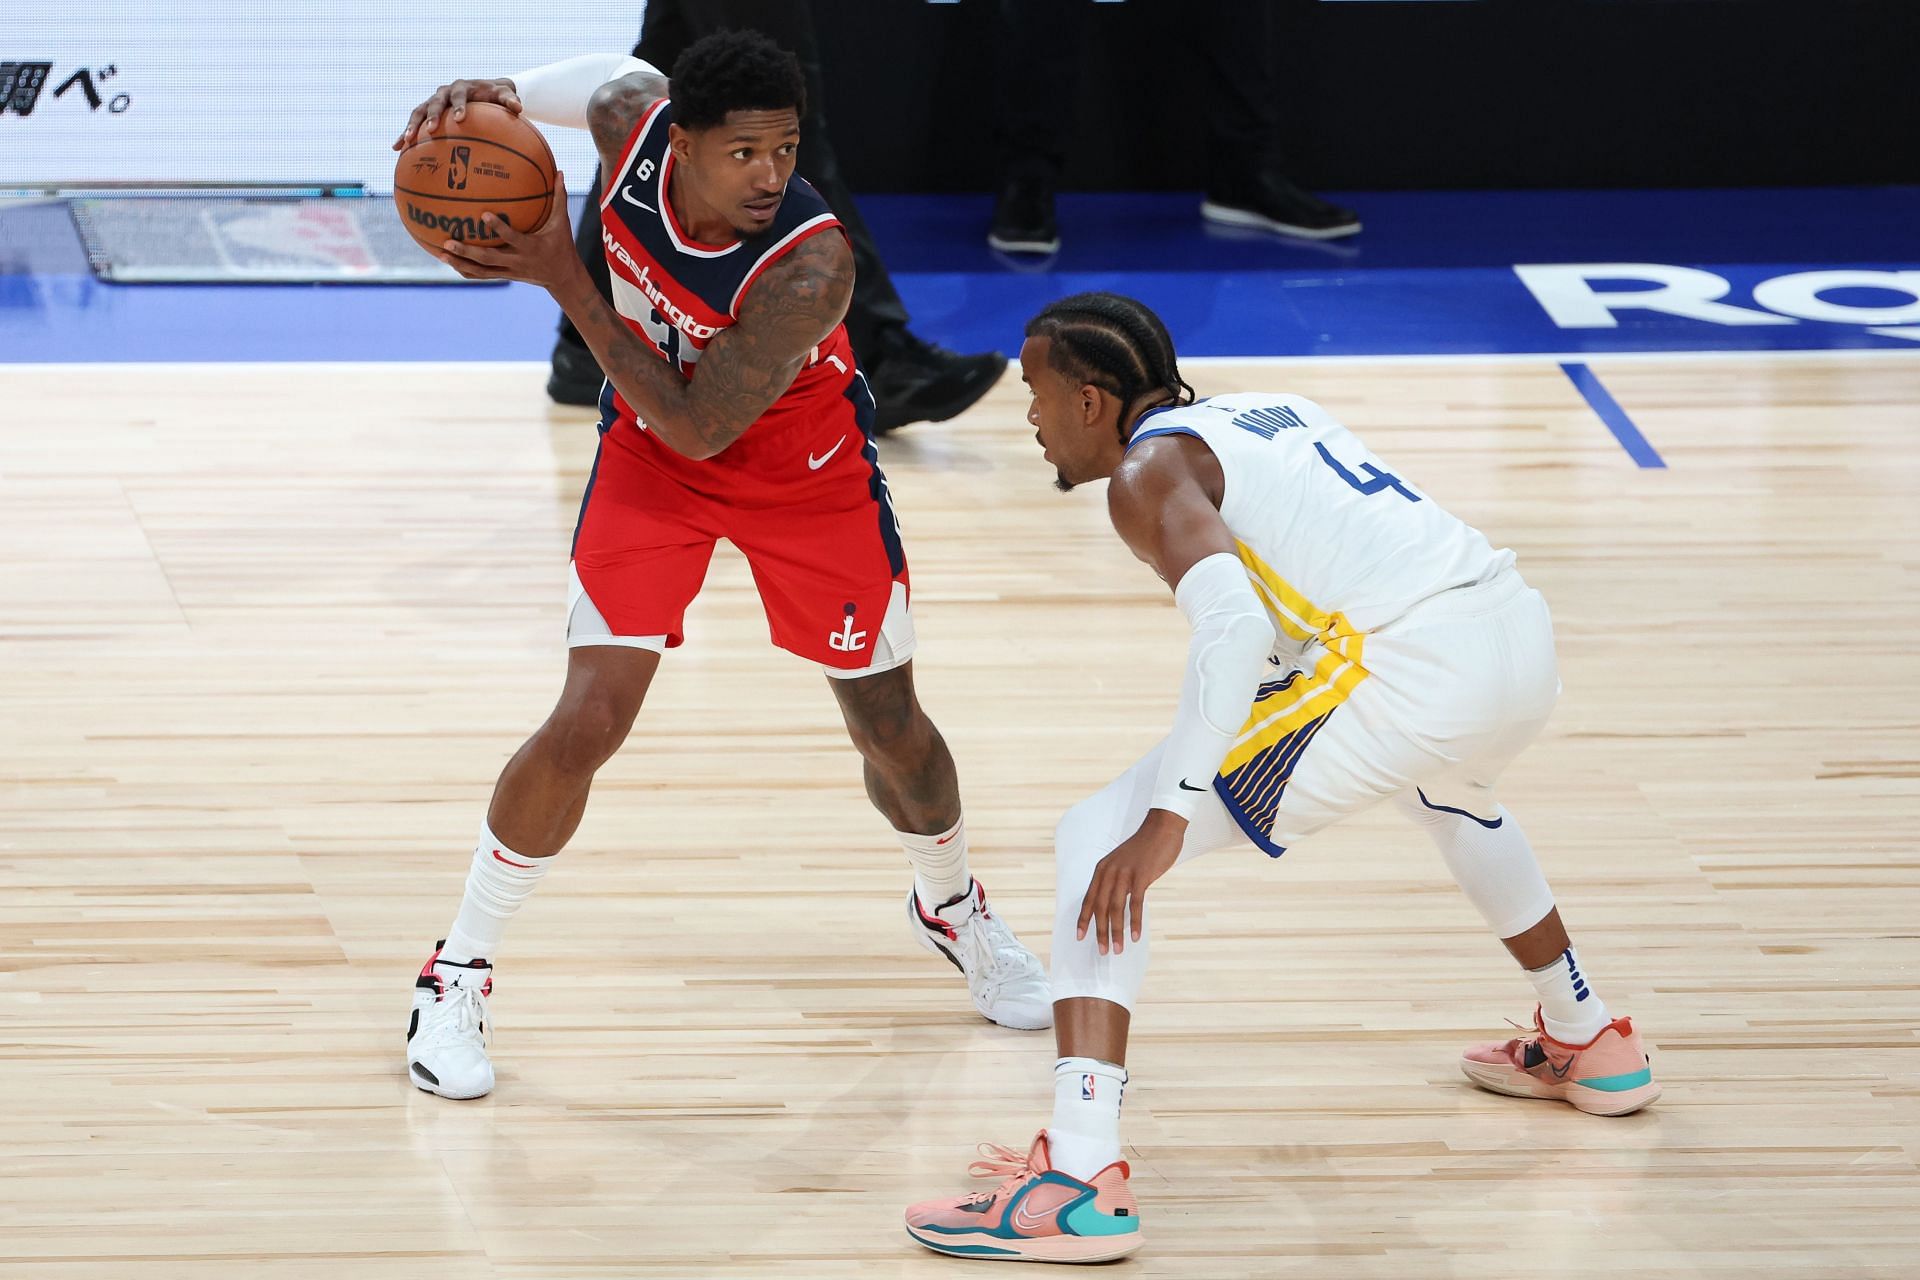 Bradley Beal looks to make a play